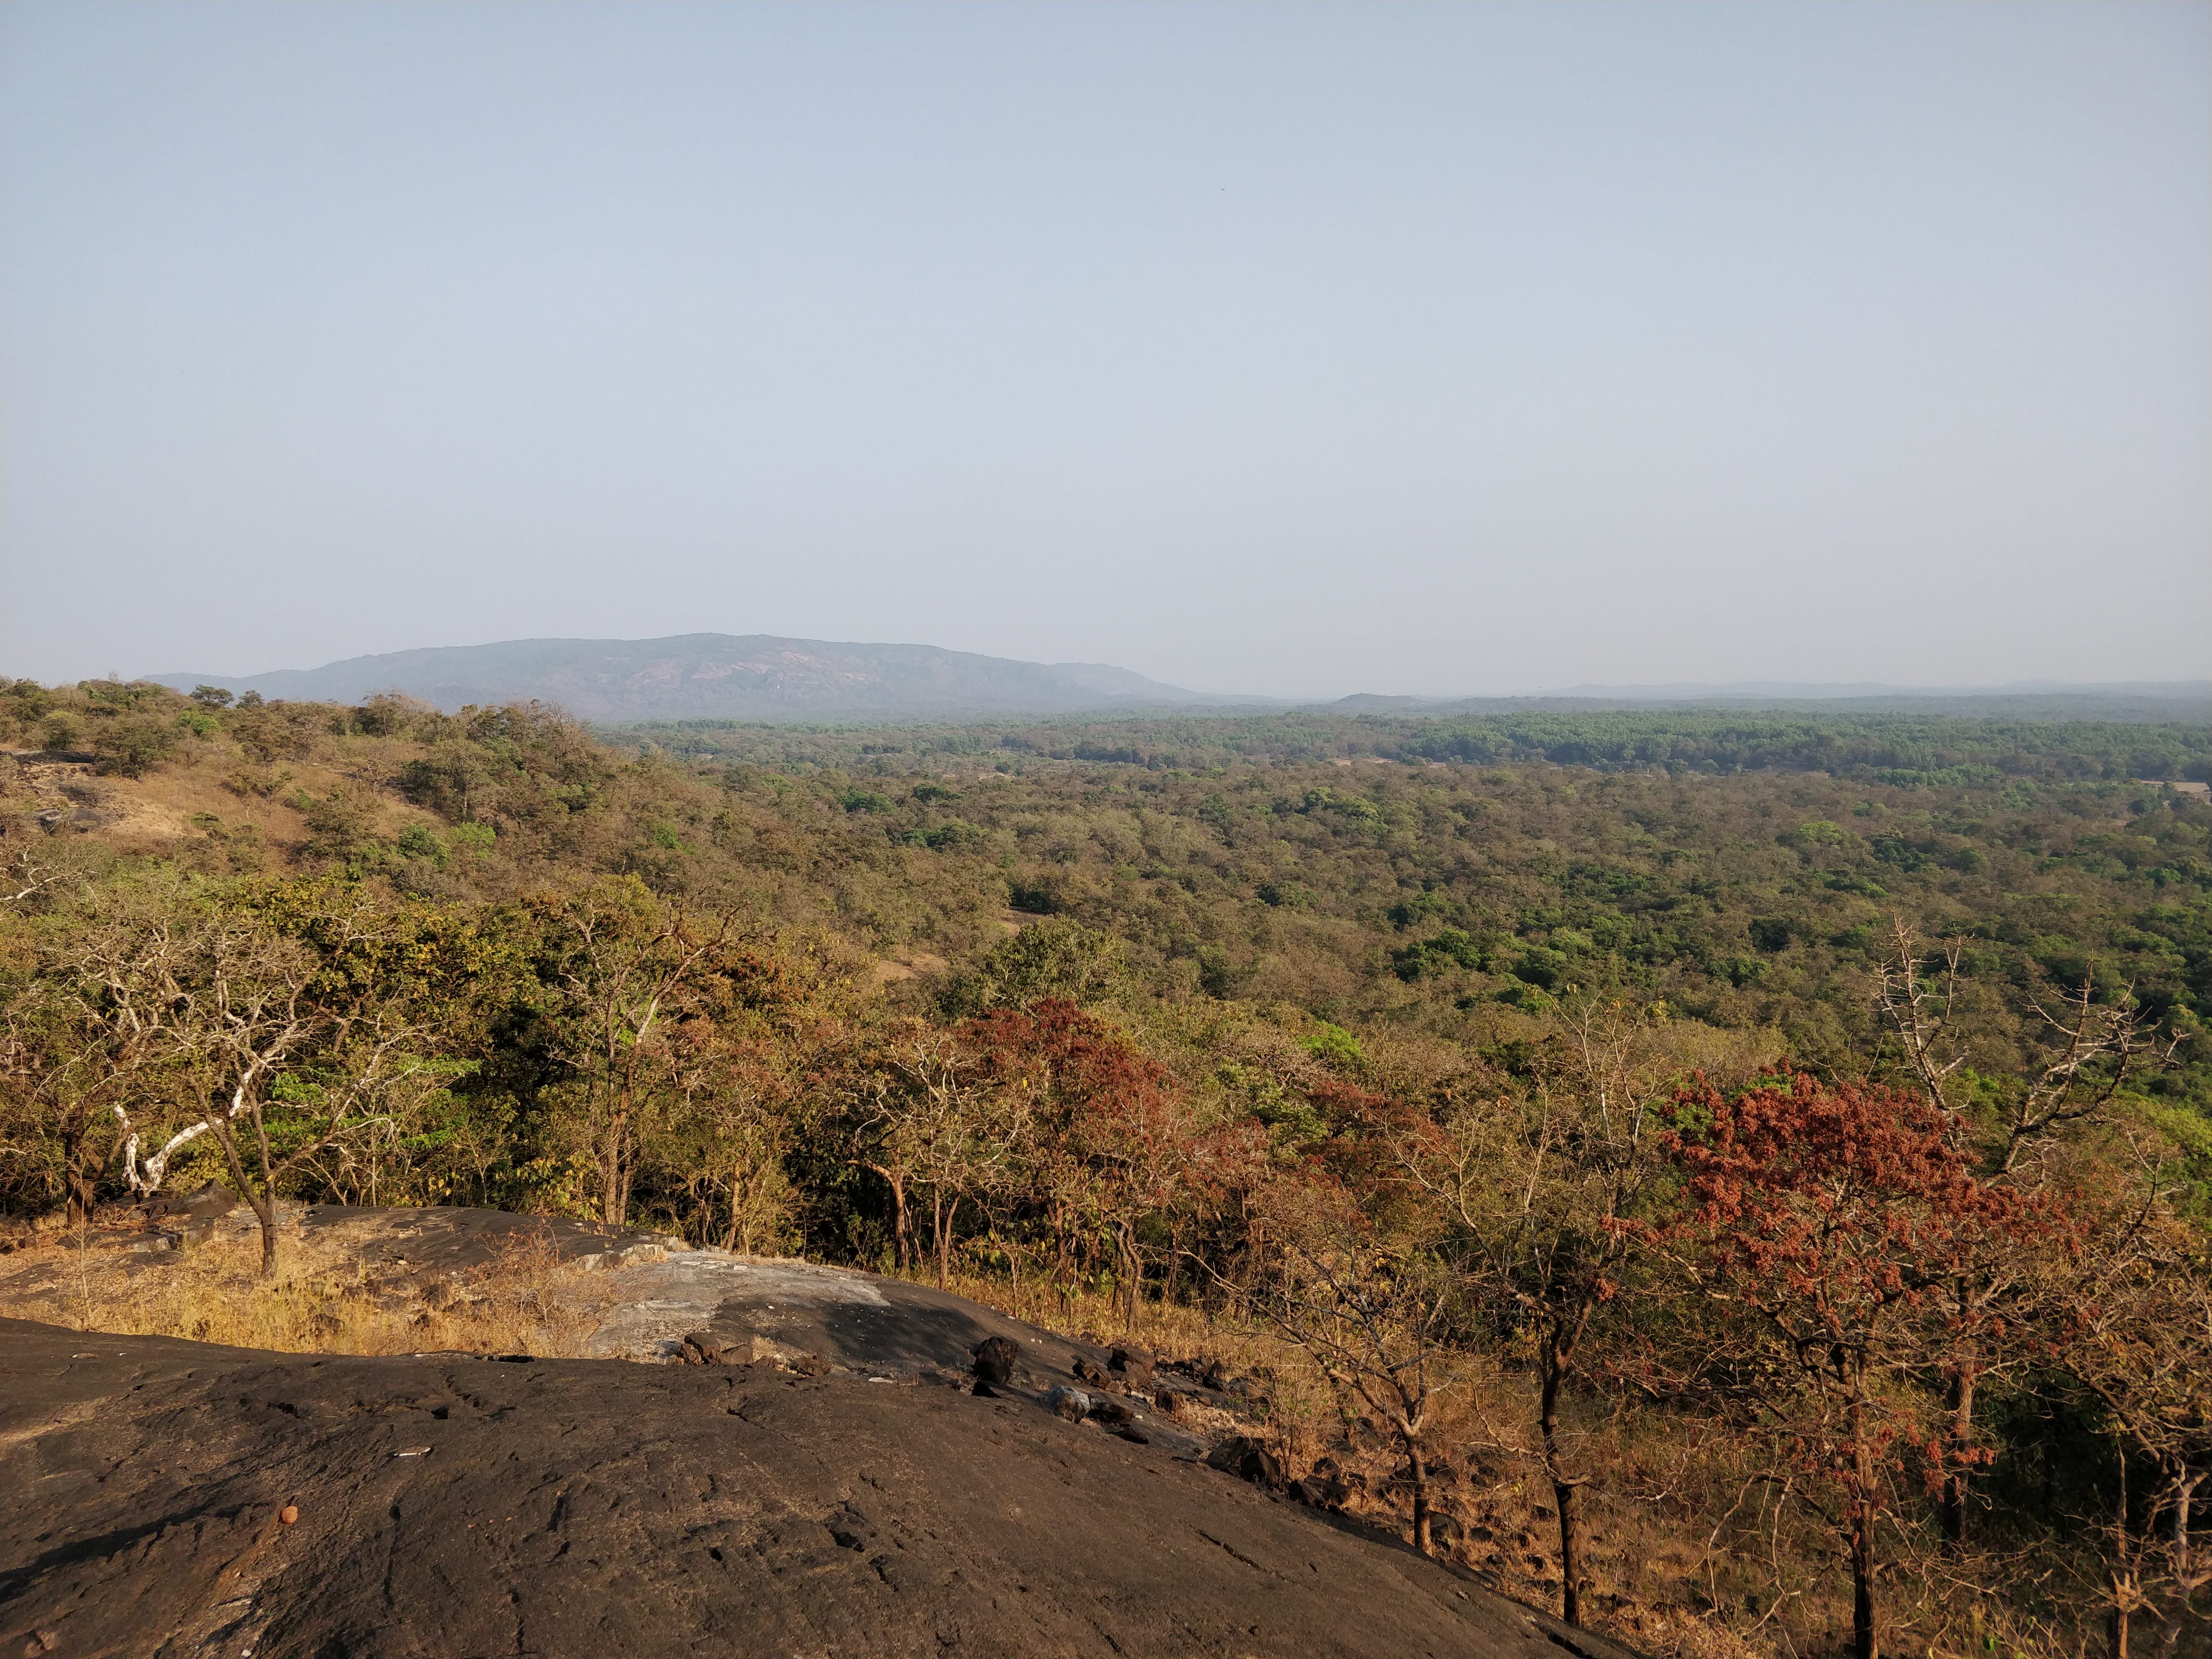 at the view point - view of the Bhimgad forest